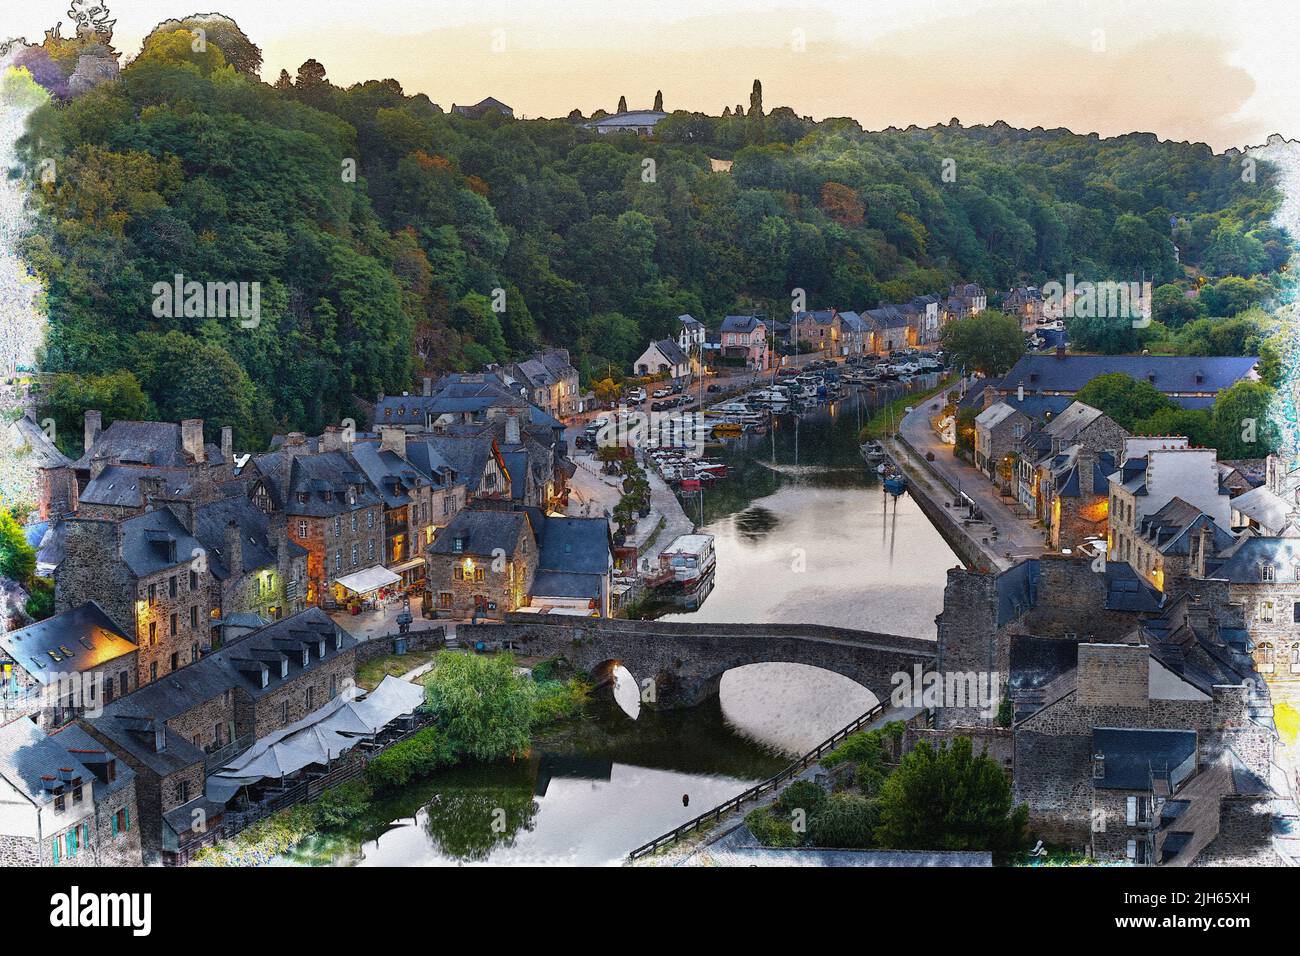 Digetal art image of the port of Dinan, France in the evening in a water color style Stock Photo